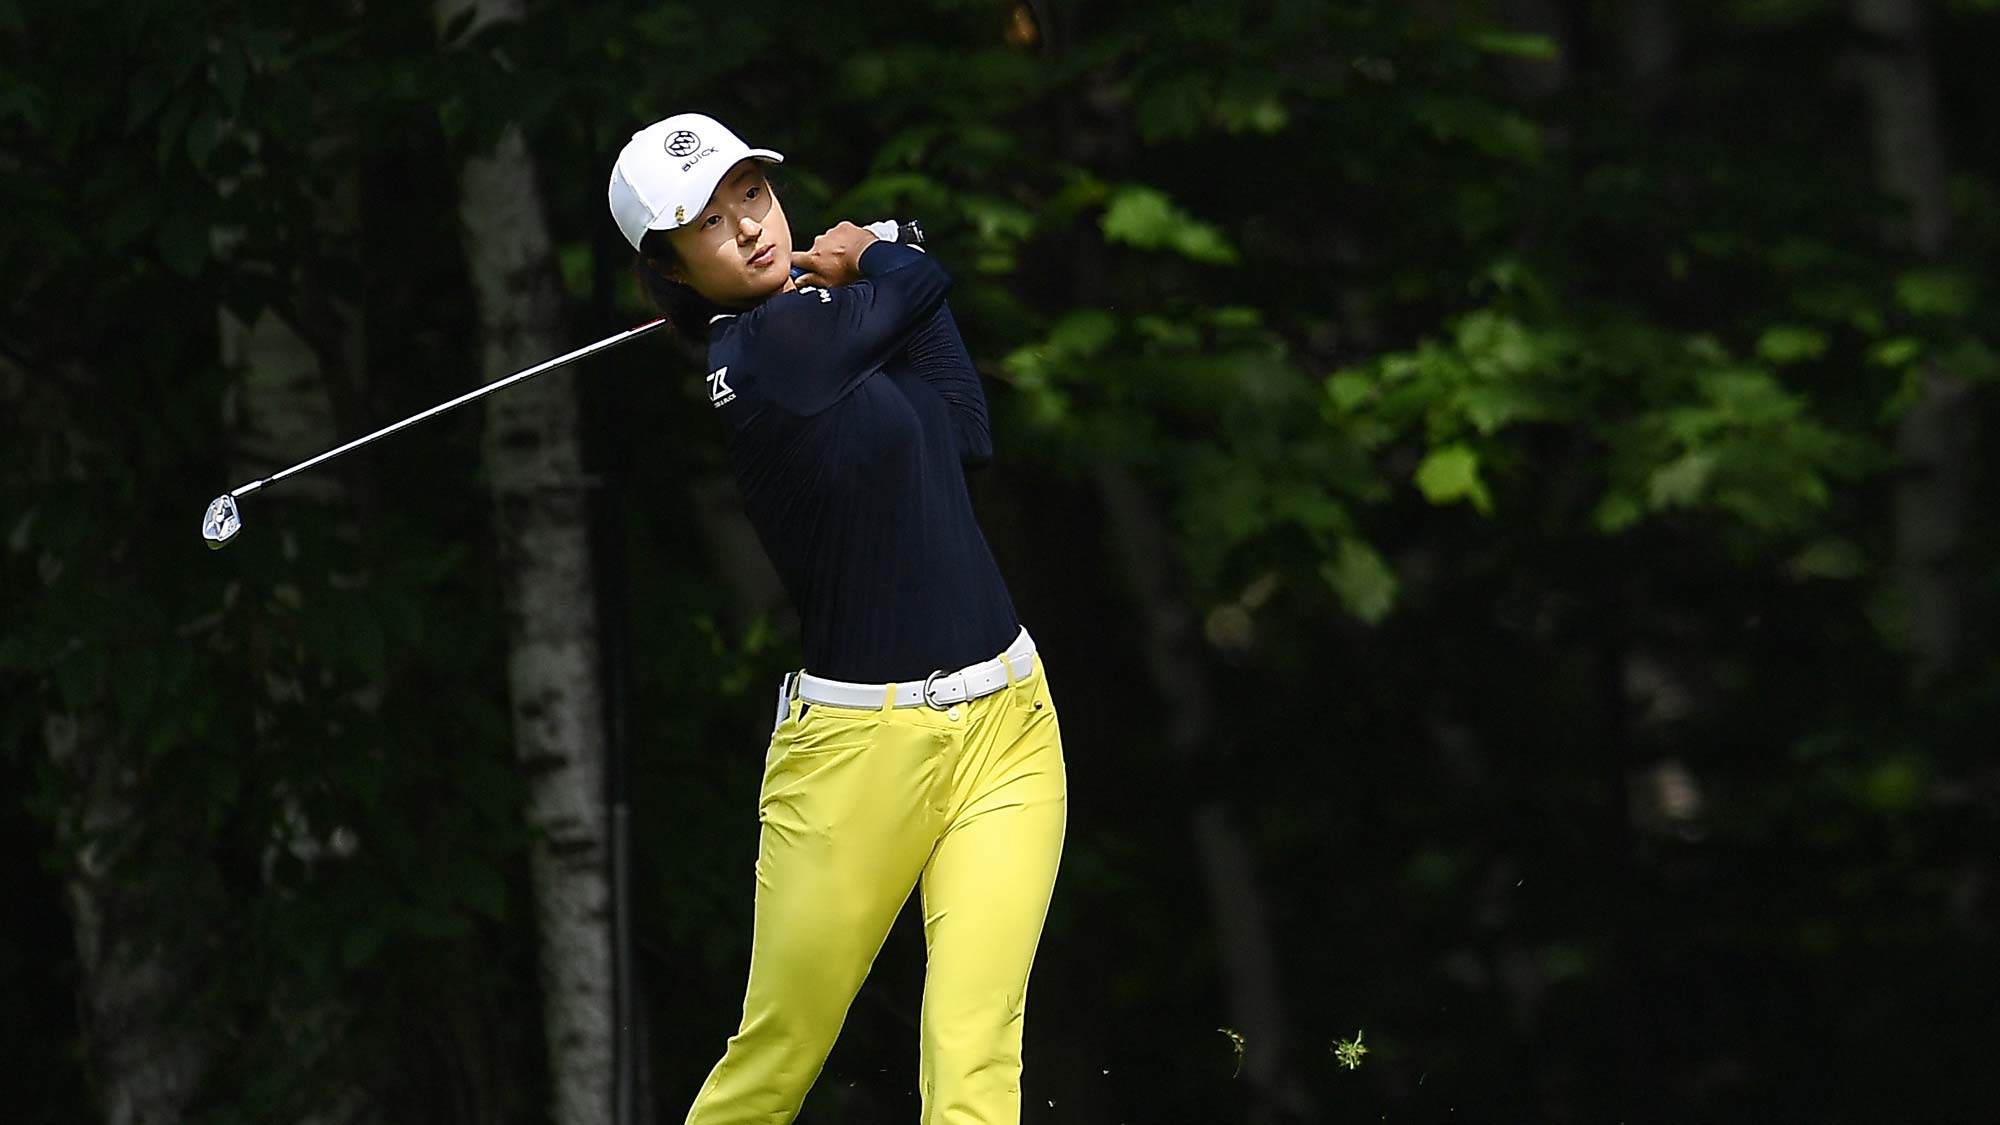 Yu Liu of China hits her second shot on the first hole during the third round of the Thornberry Creek LPGA Classic